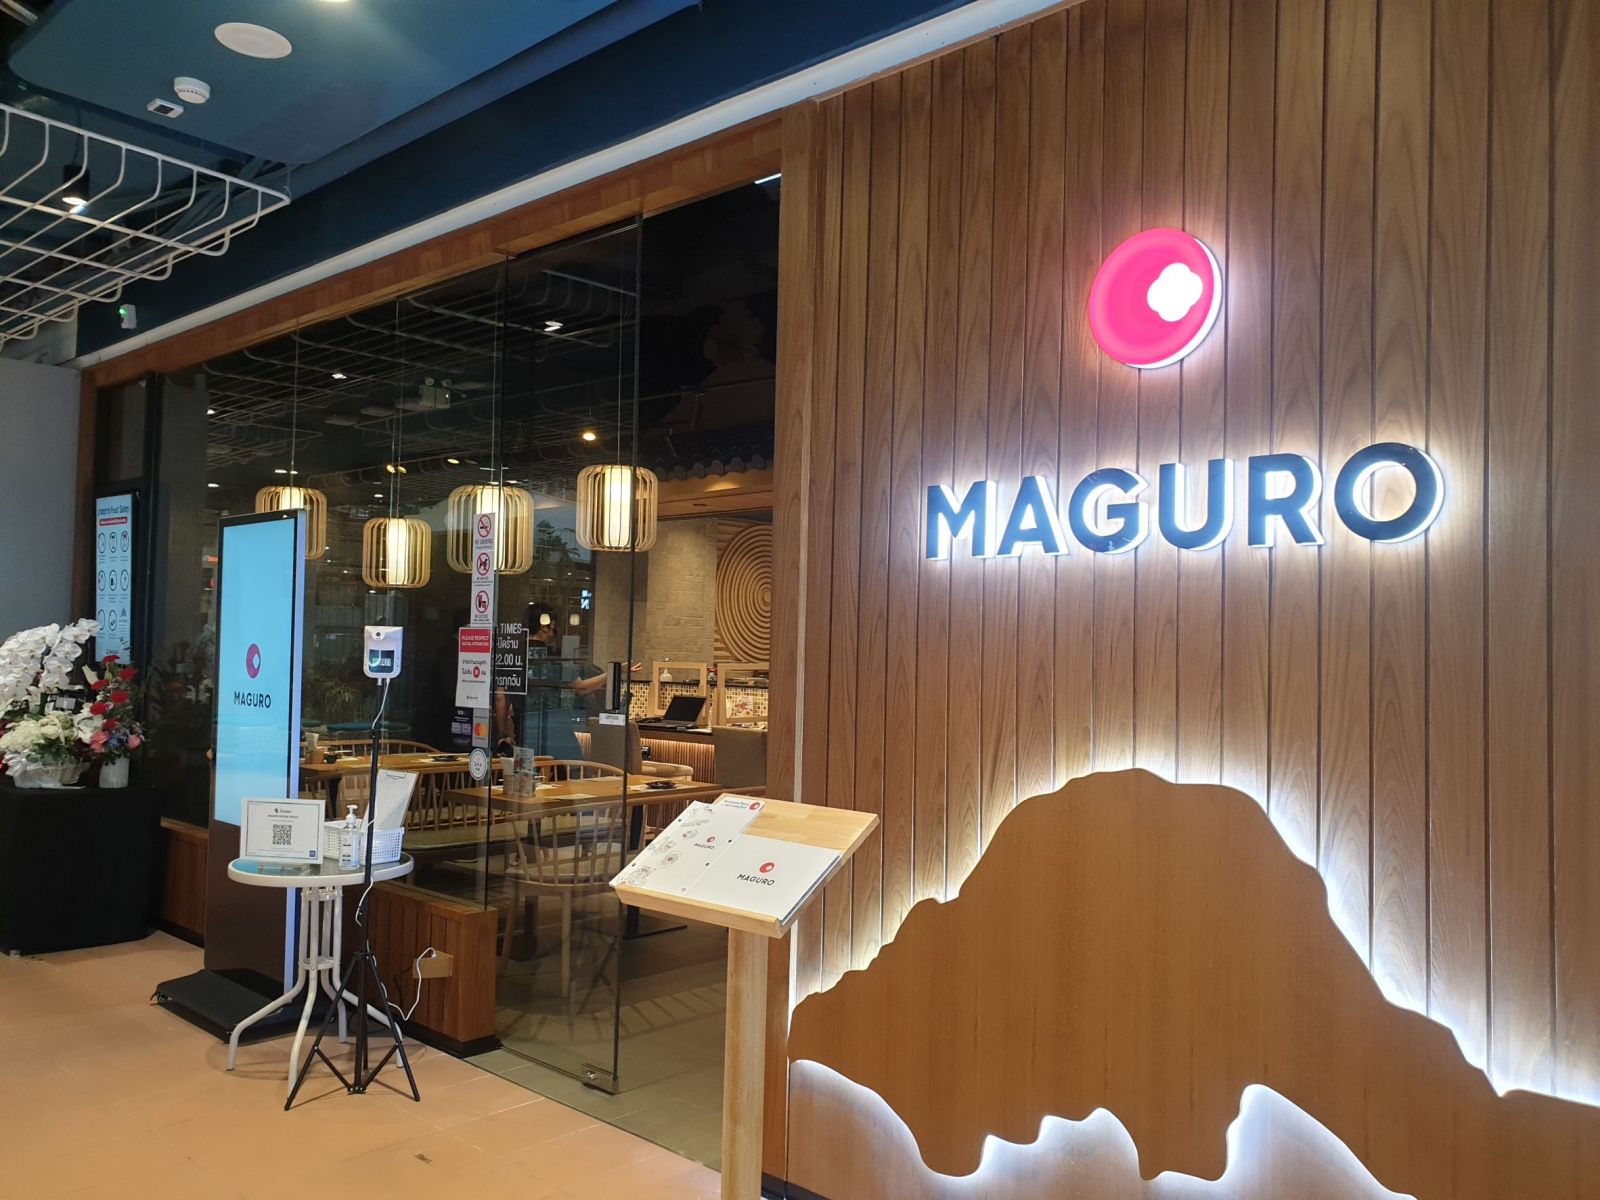 MAGURO Restaurant: Creatively Coping with Covid Restrictions 